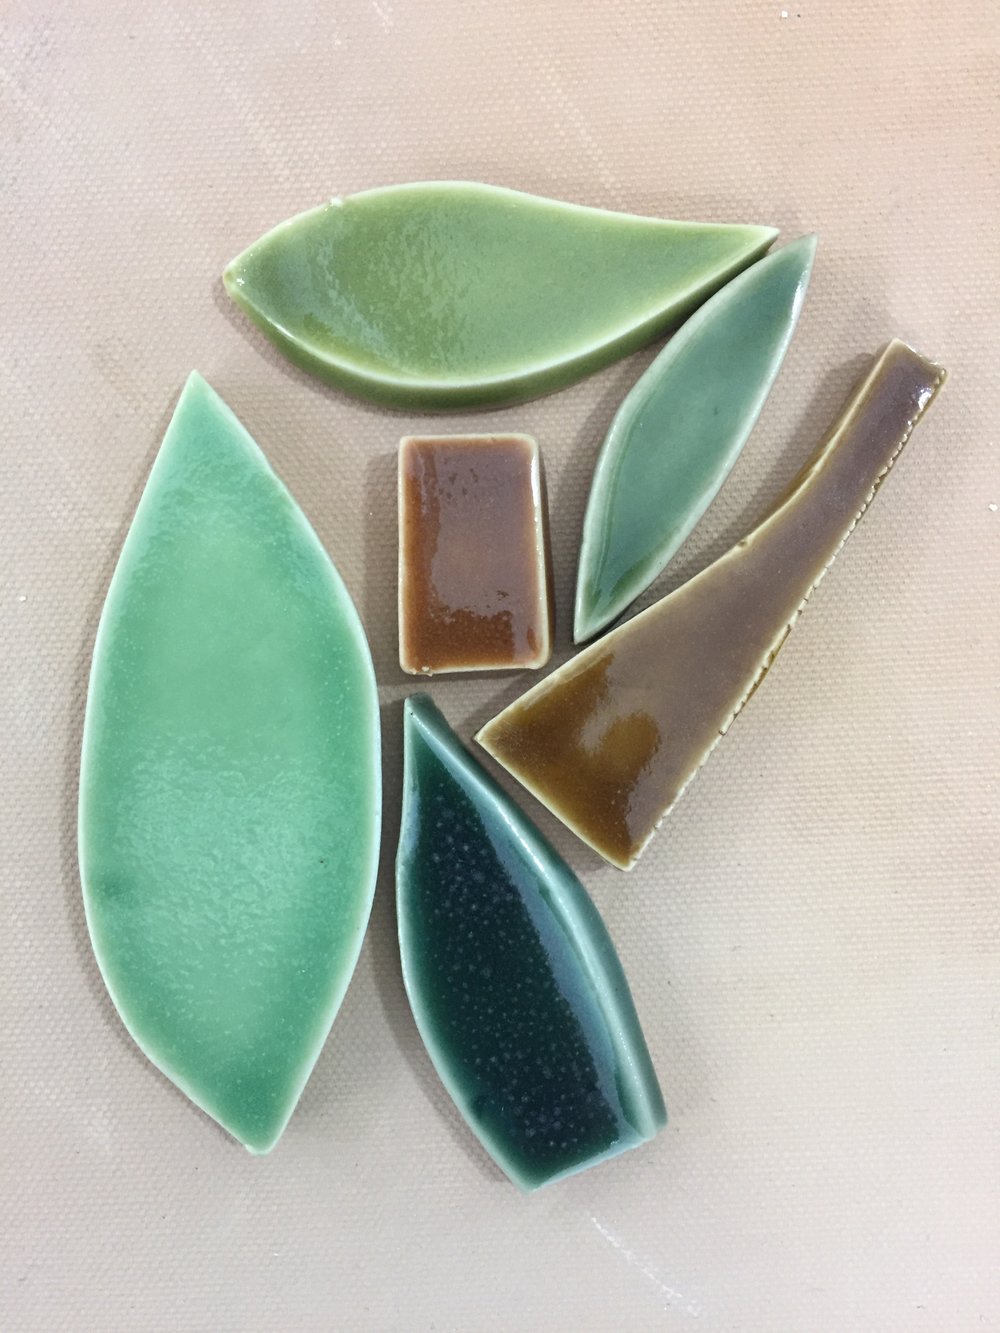  A collection of glaze colors for the mosaic.  